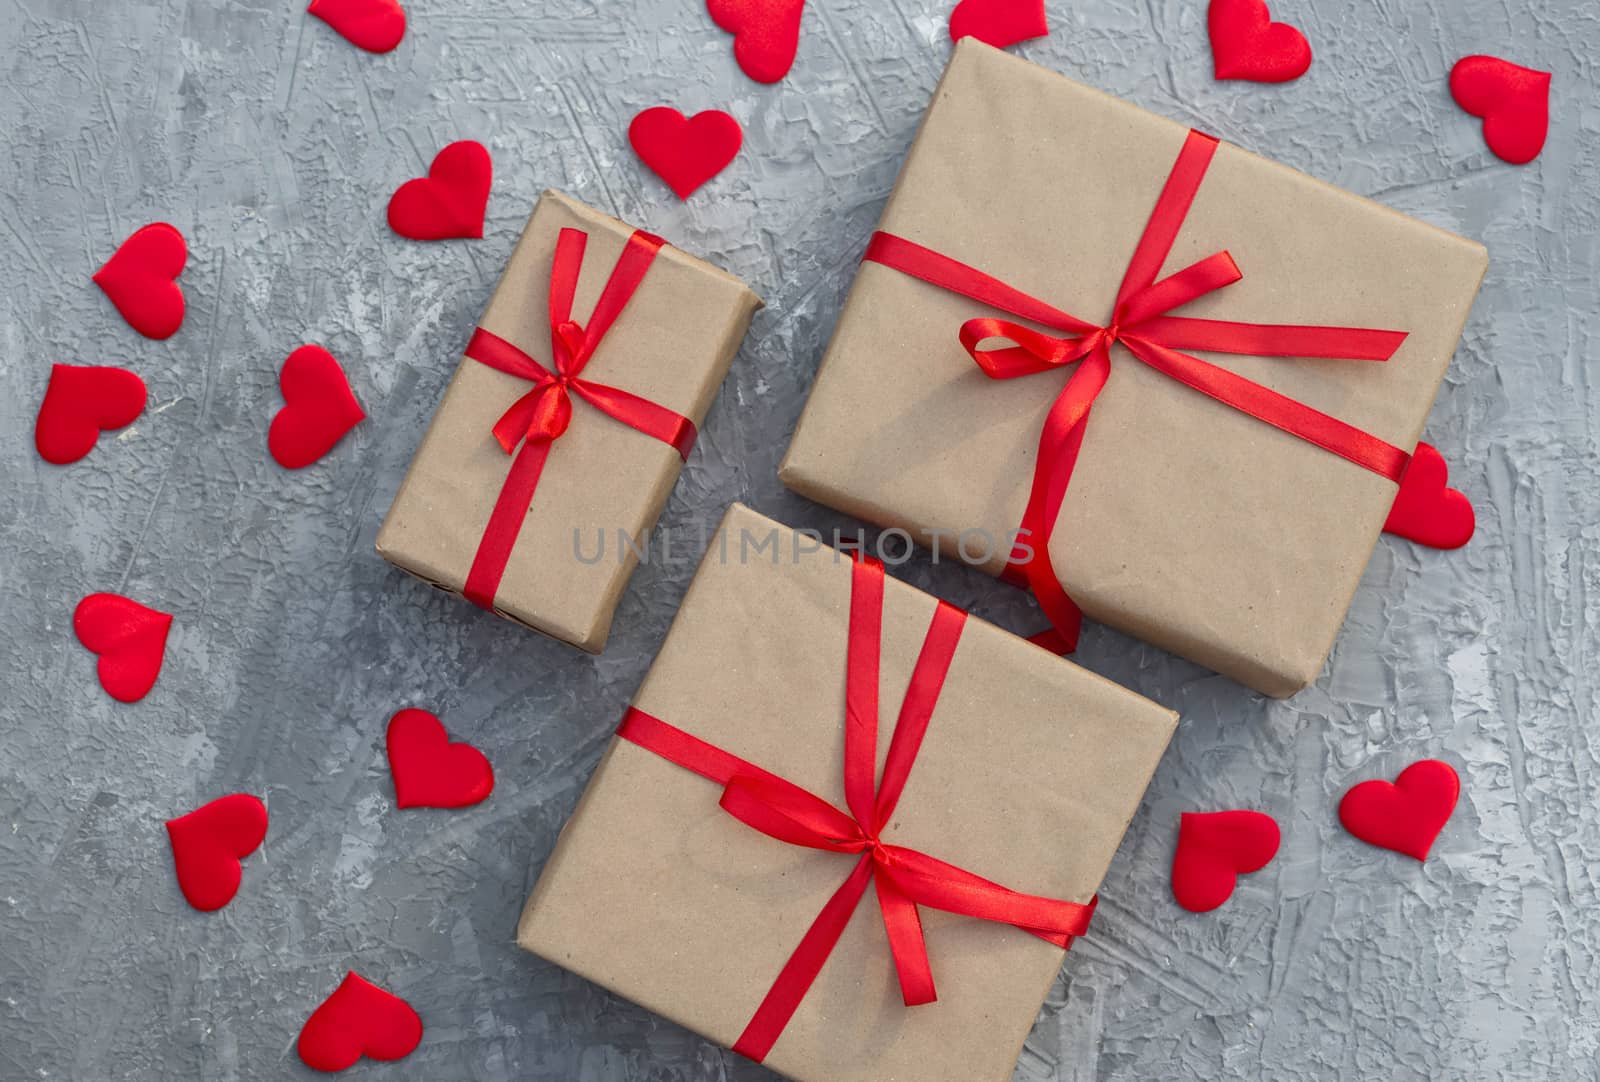 Romantic background with gifts tied with a red ribbon and red hearts by galinasharapova